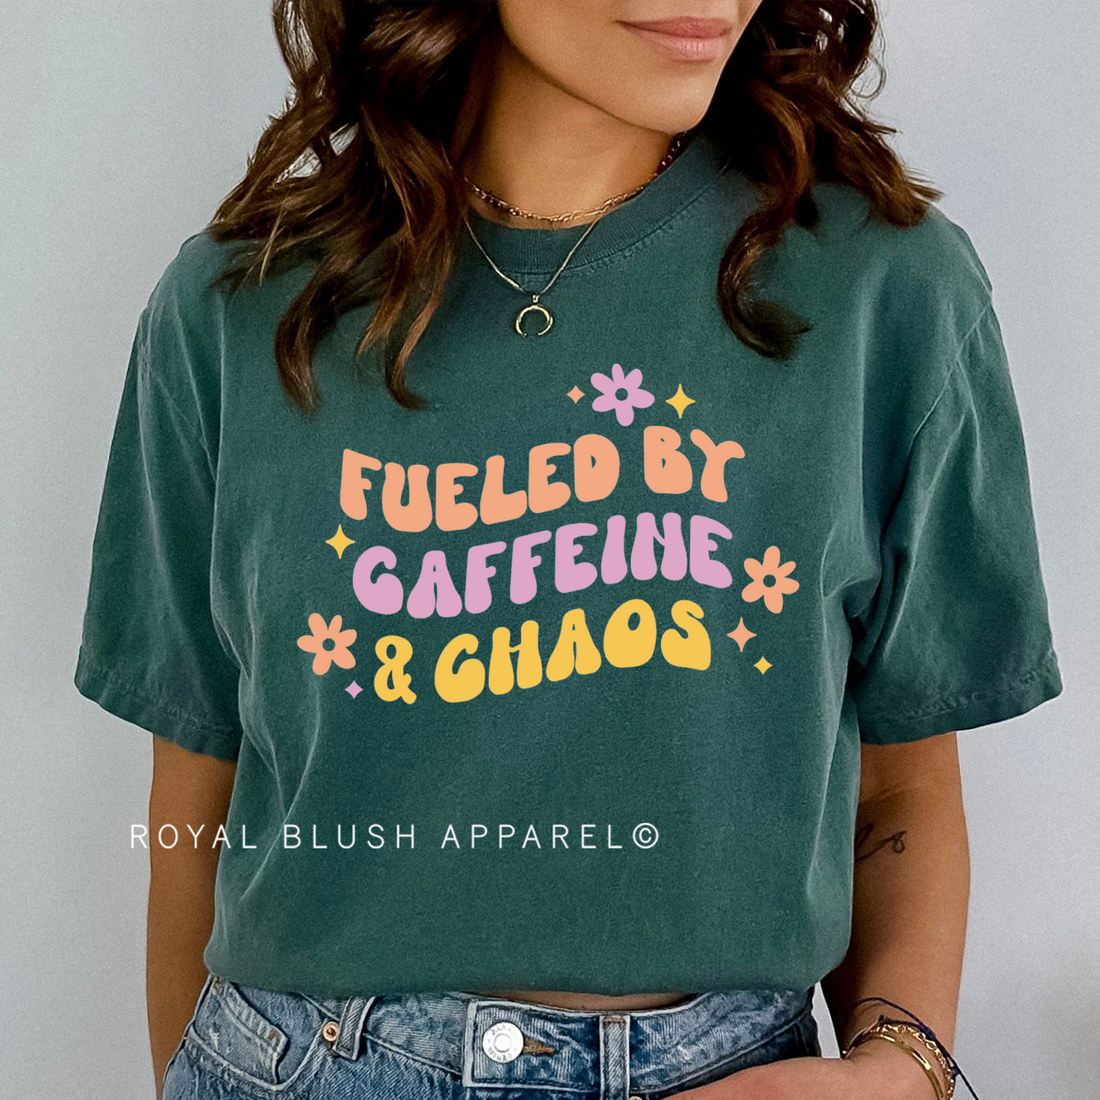 Fueled By ✿ Caffeine &amp; Chaos Full Color Transfer